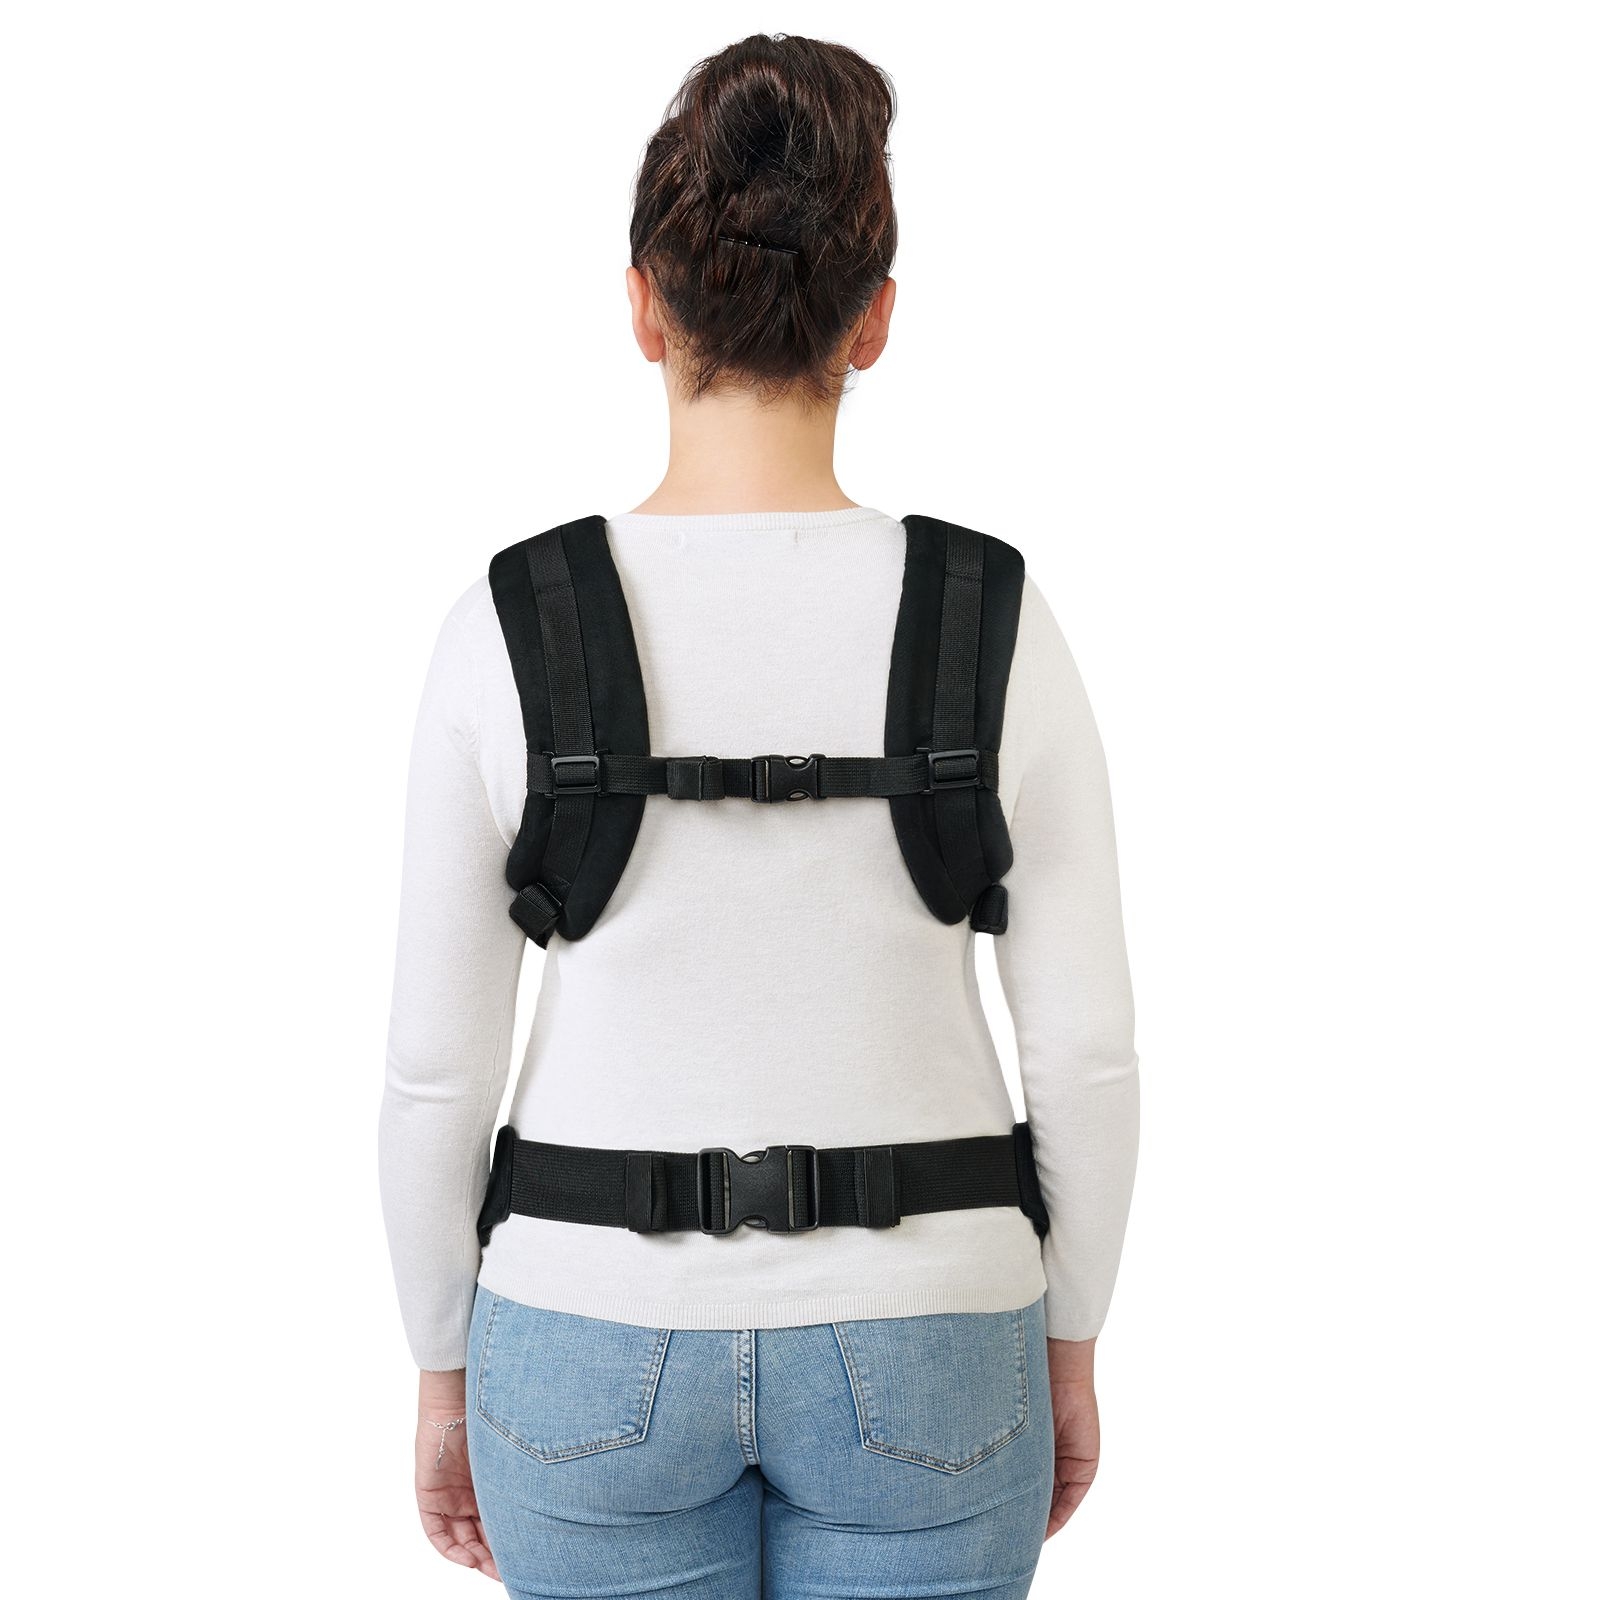 Baby carrier HUGGY Freedom